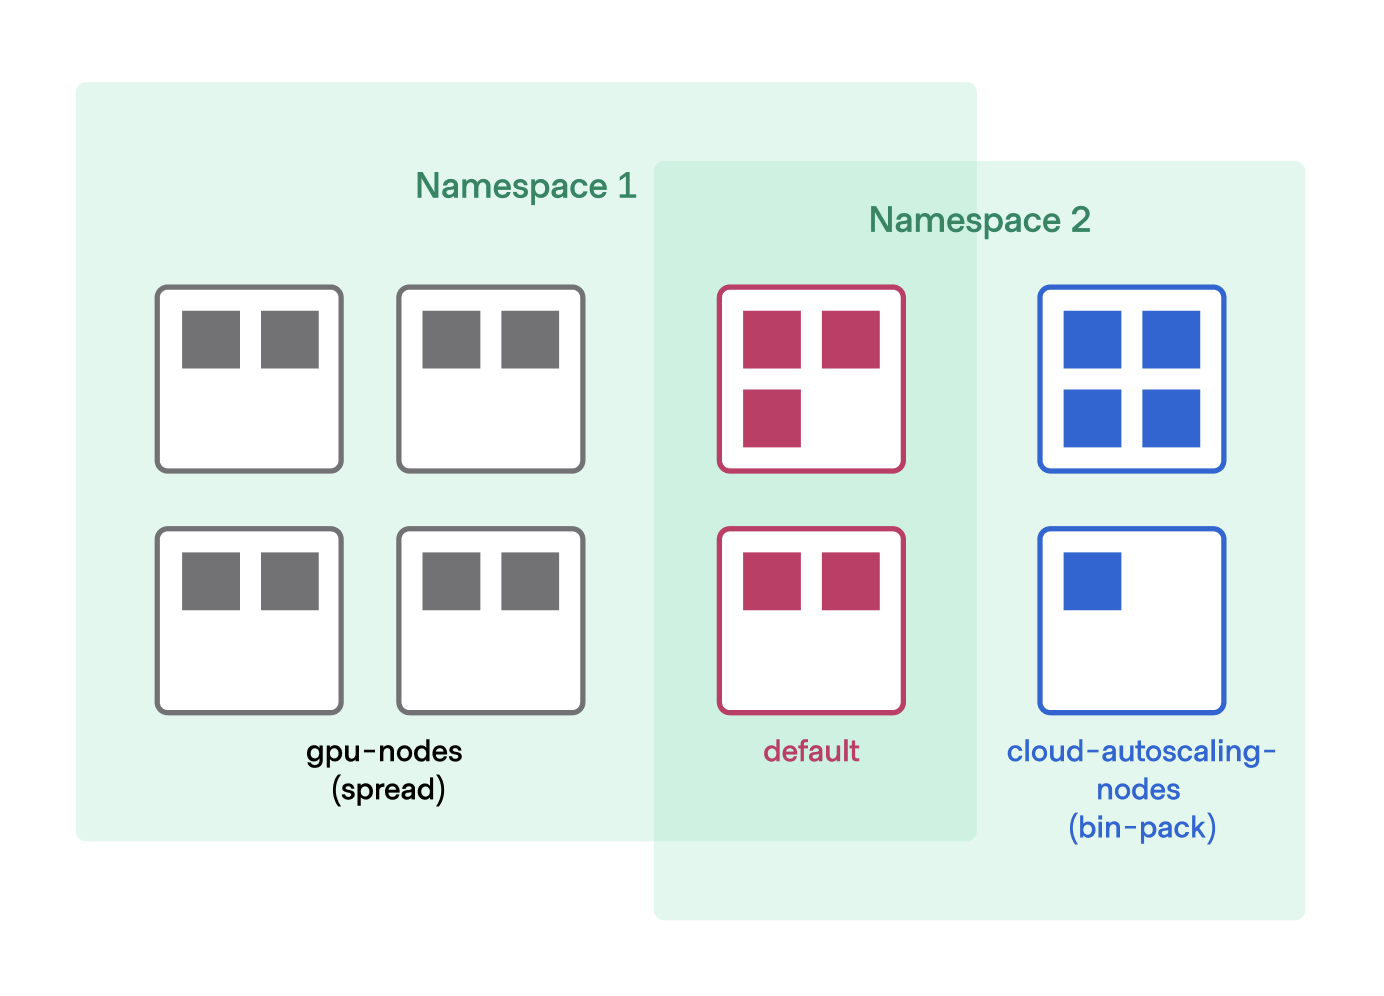 Node pools separated by namespace